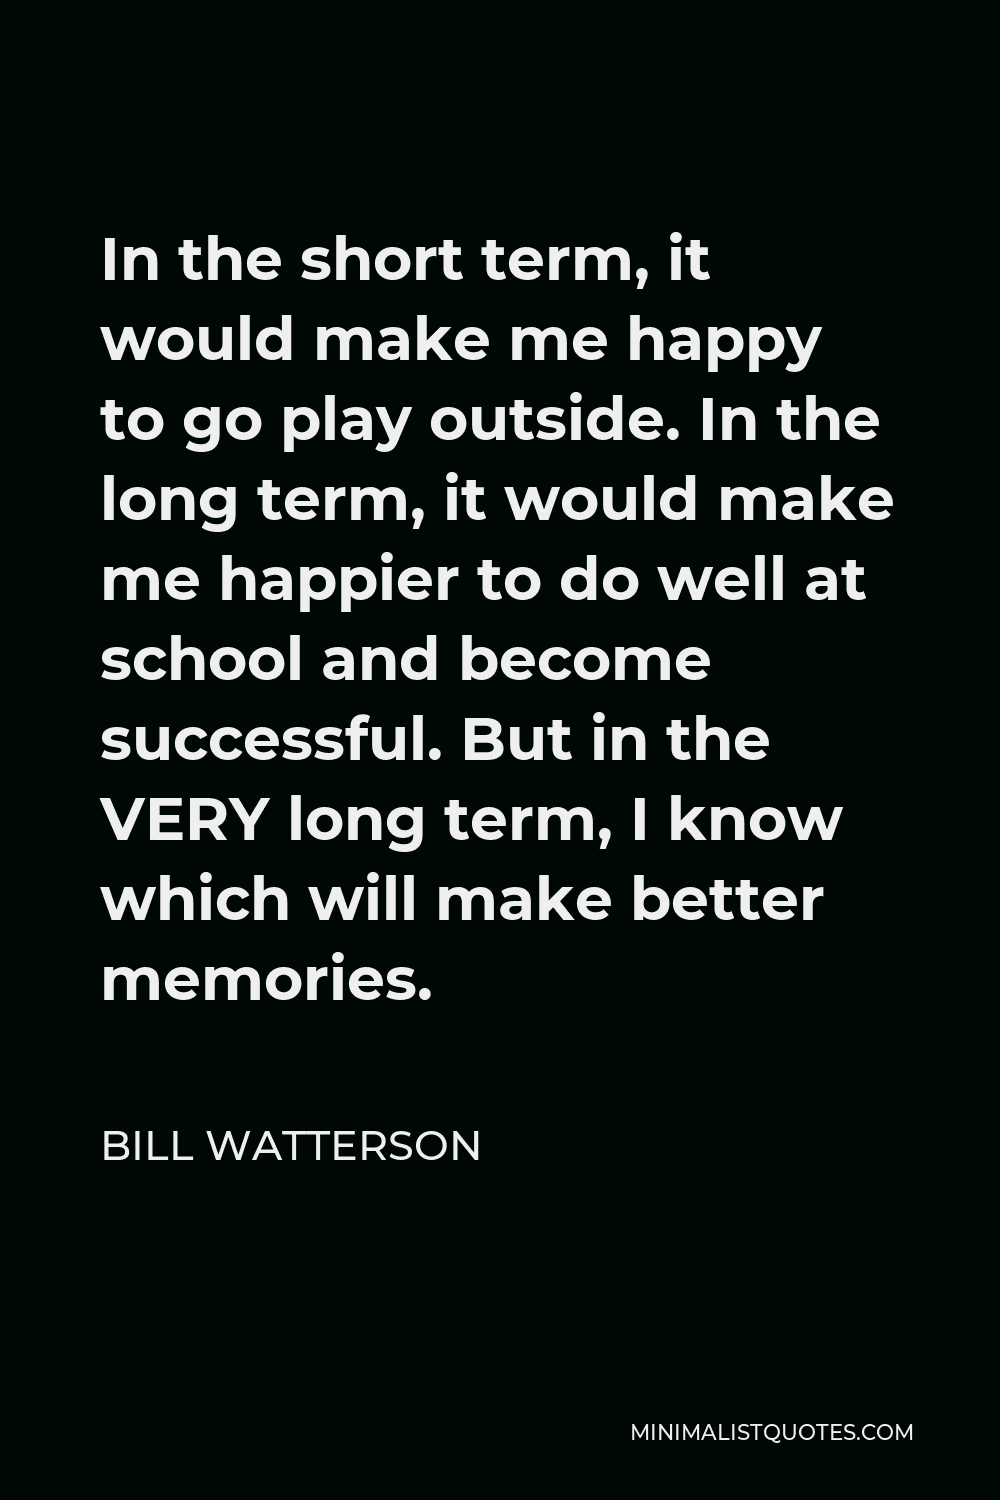 Bill Watterson Quote - In the short term, it would make me happy to go play outside. In the long term, it would make me happier to do well at school and become successful. But in the VERY long term, I know which will make better memories.